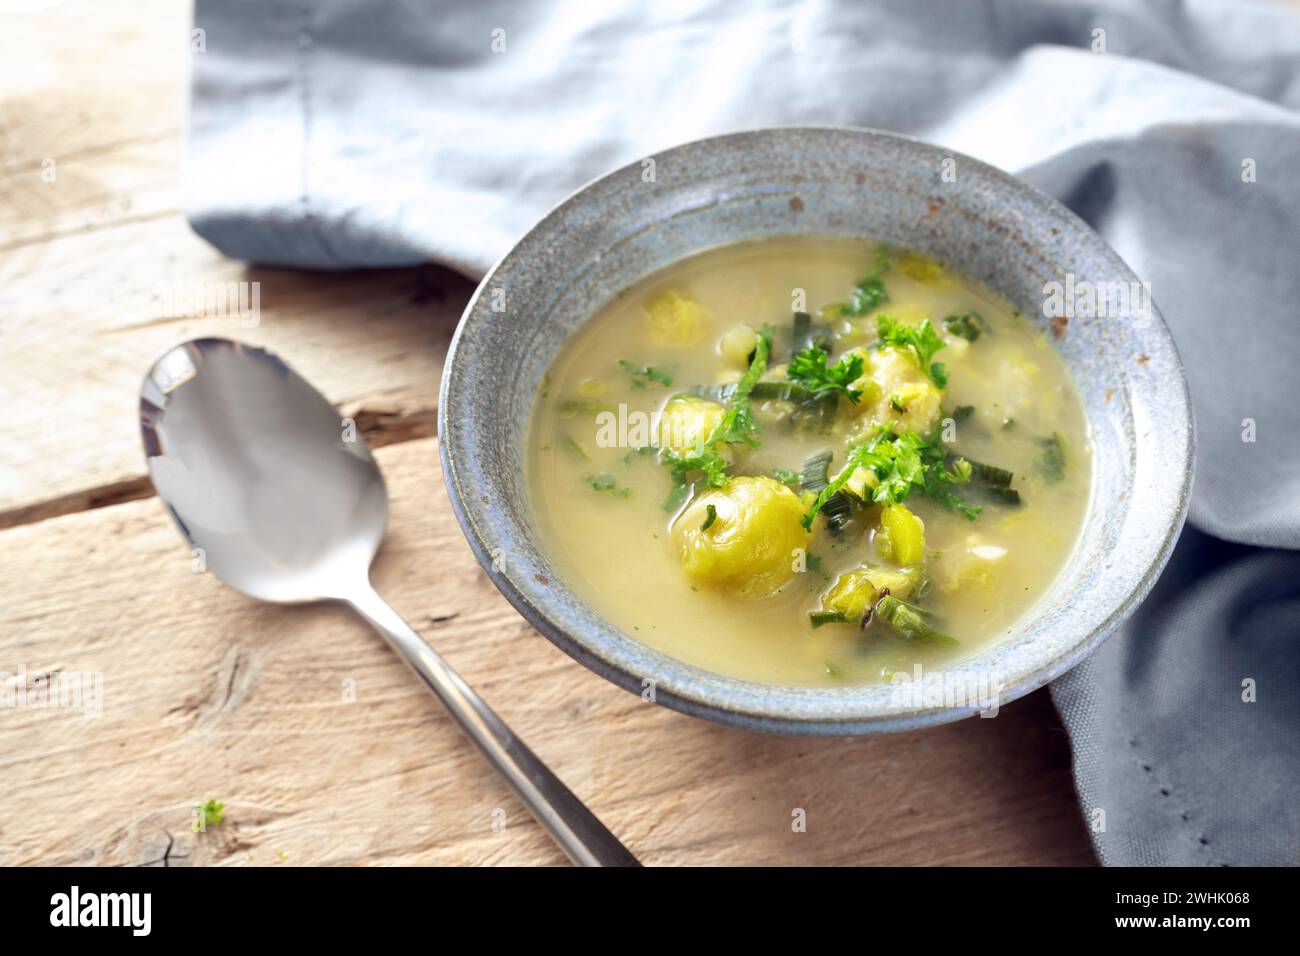 Vegetarian soup from vegetables like brussels sprout, leek and potato with parsley garnish in a blue bowl, spoon and napkin on a Stock Photo